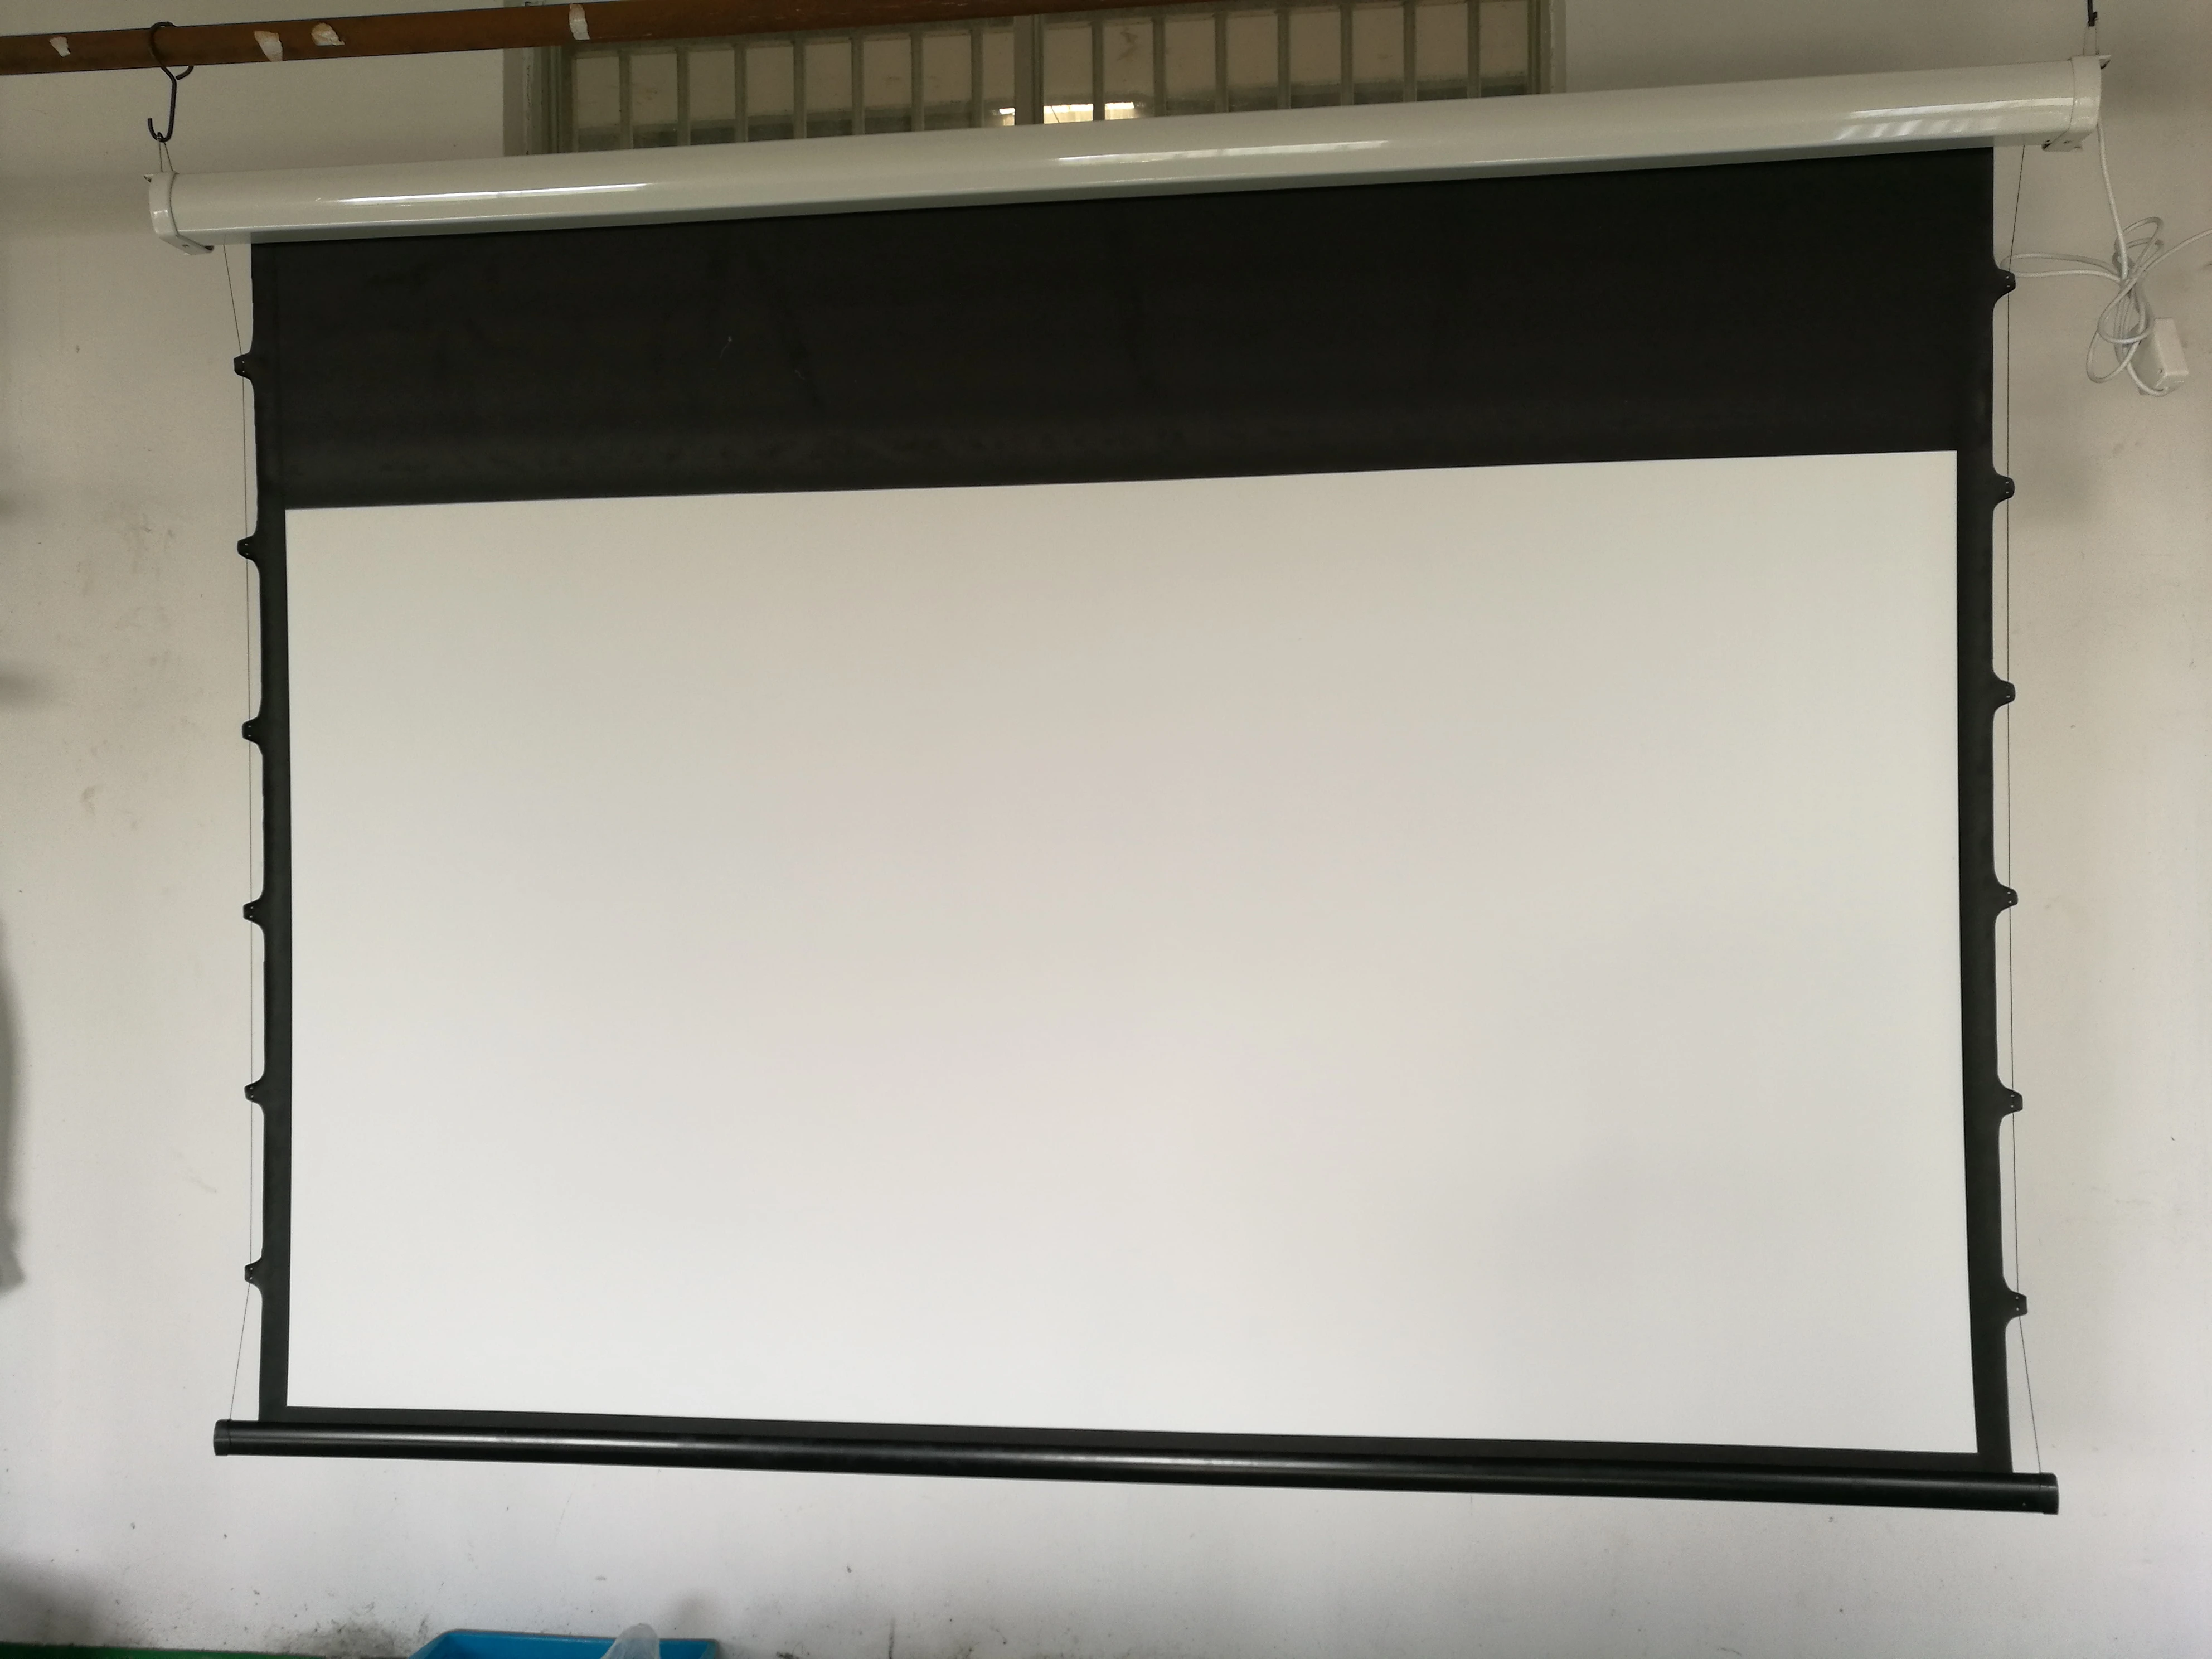 100 inch 120 inch 150 inch format 4:3 16:9 tab tensioned ambient light projection screen alr long throw ceiling projector screen